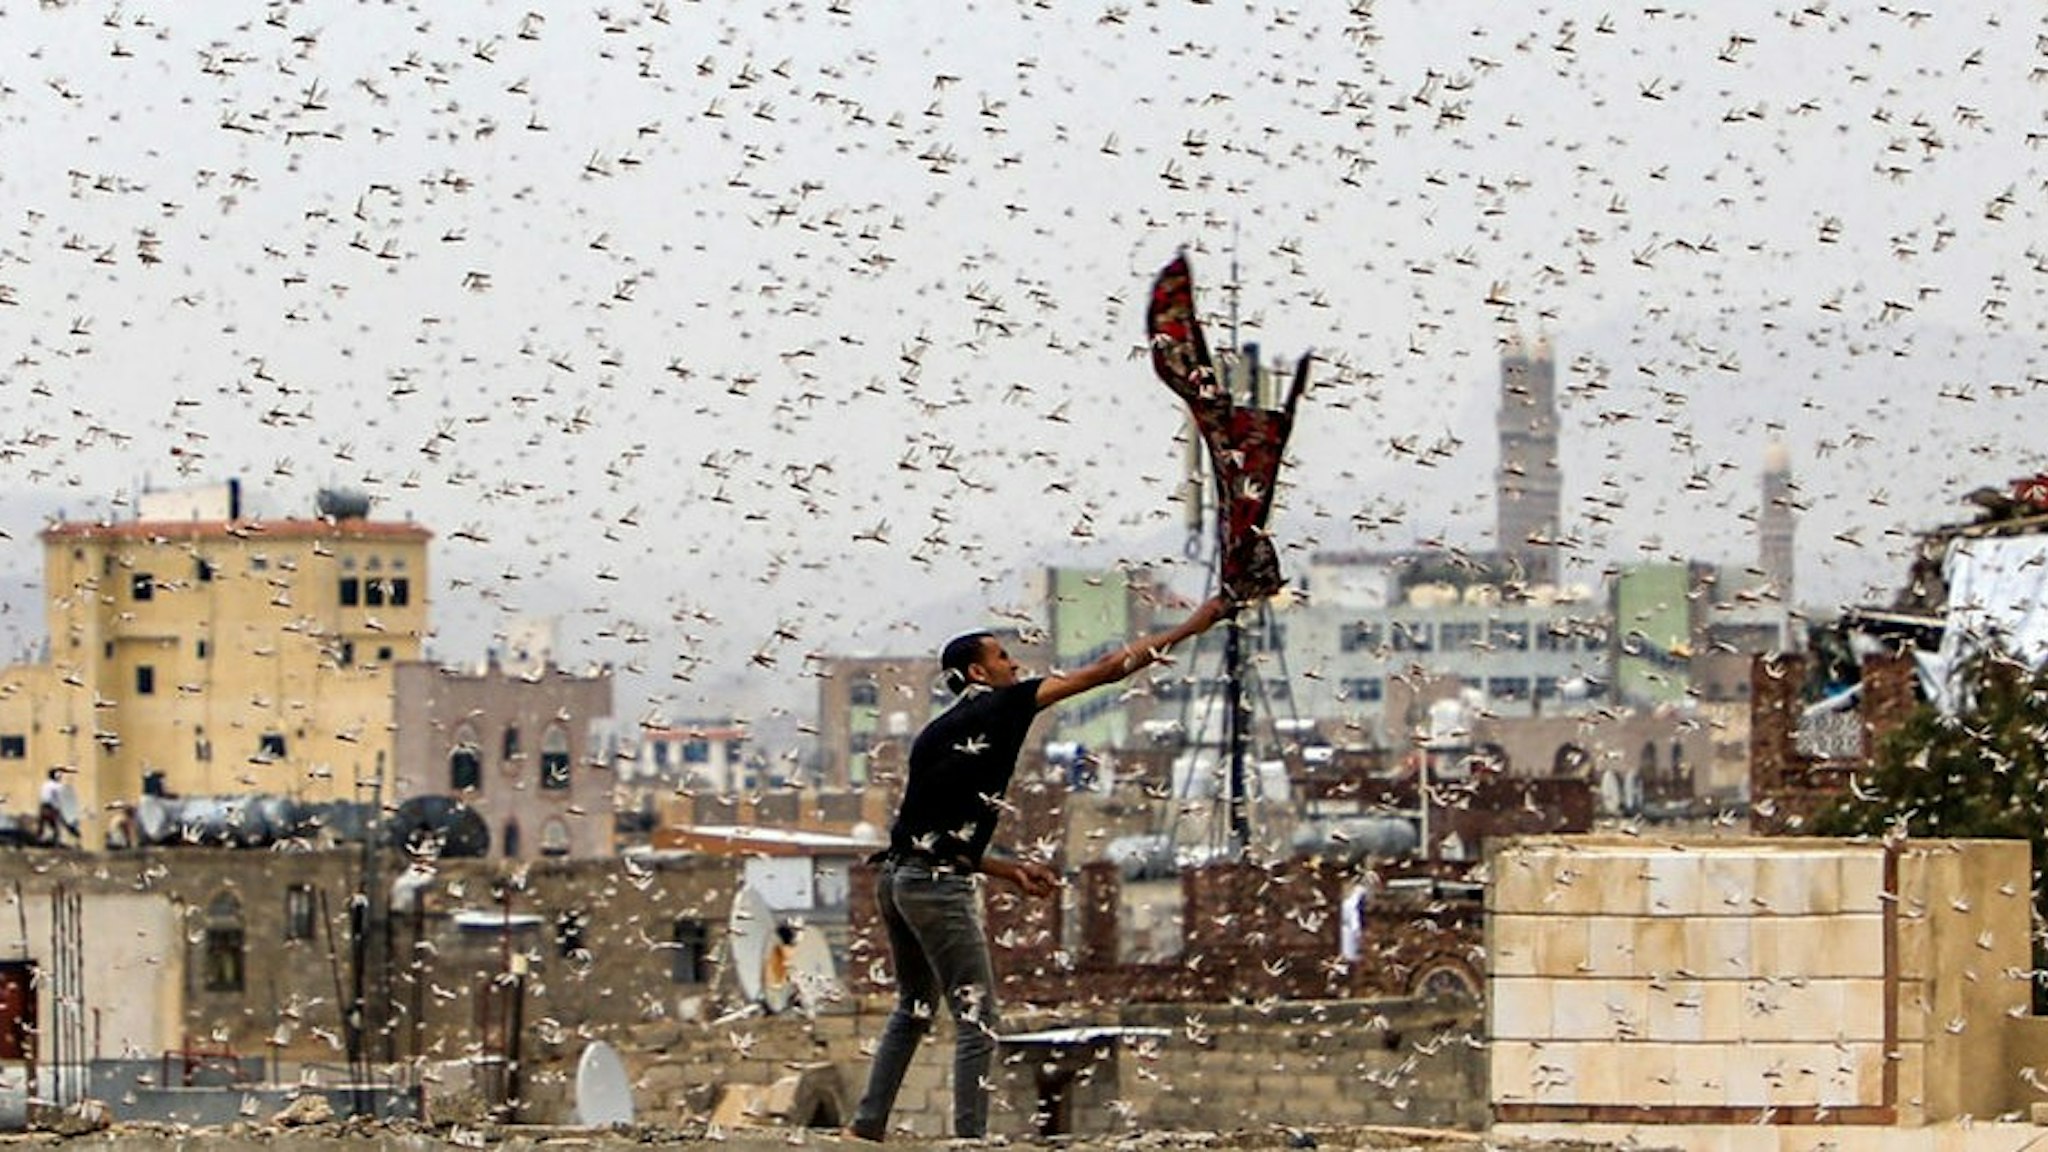 TOPSHOT - A man tries to catch locusts while standing on a rooftop as they swarm over the Huthi rebel-held Yemeni capital Sanaa on July 28, 2019. (Photo by Mohammed HUWAIS / AFP) (Photo credit should read